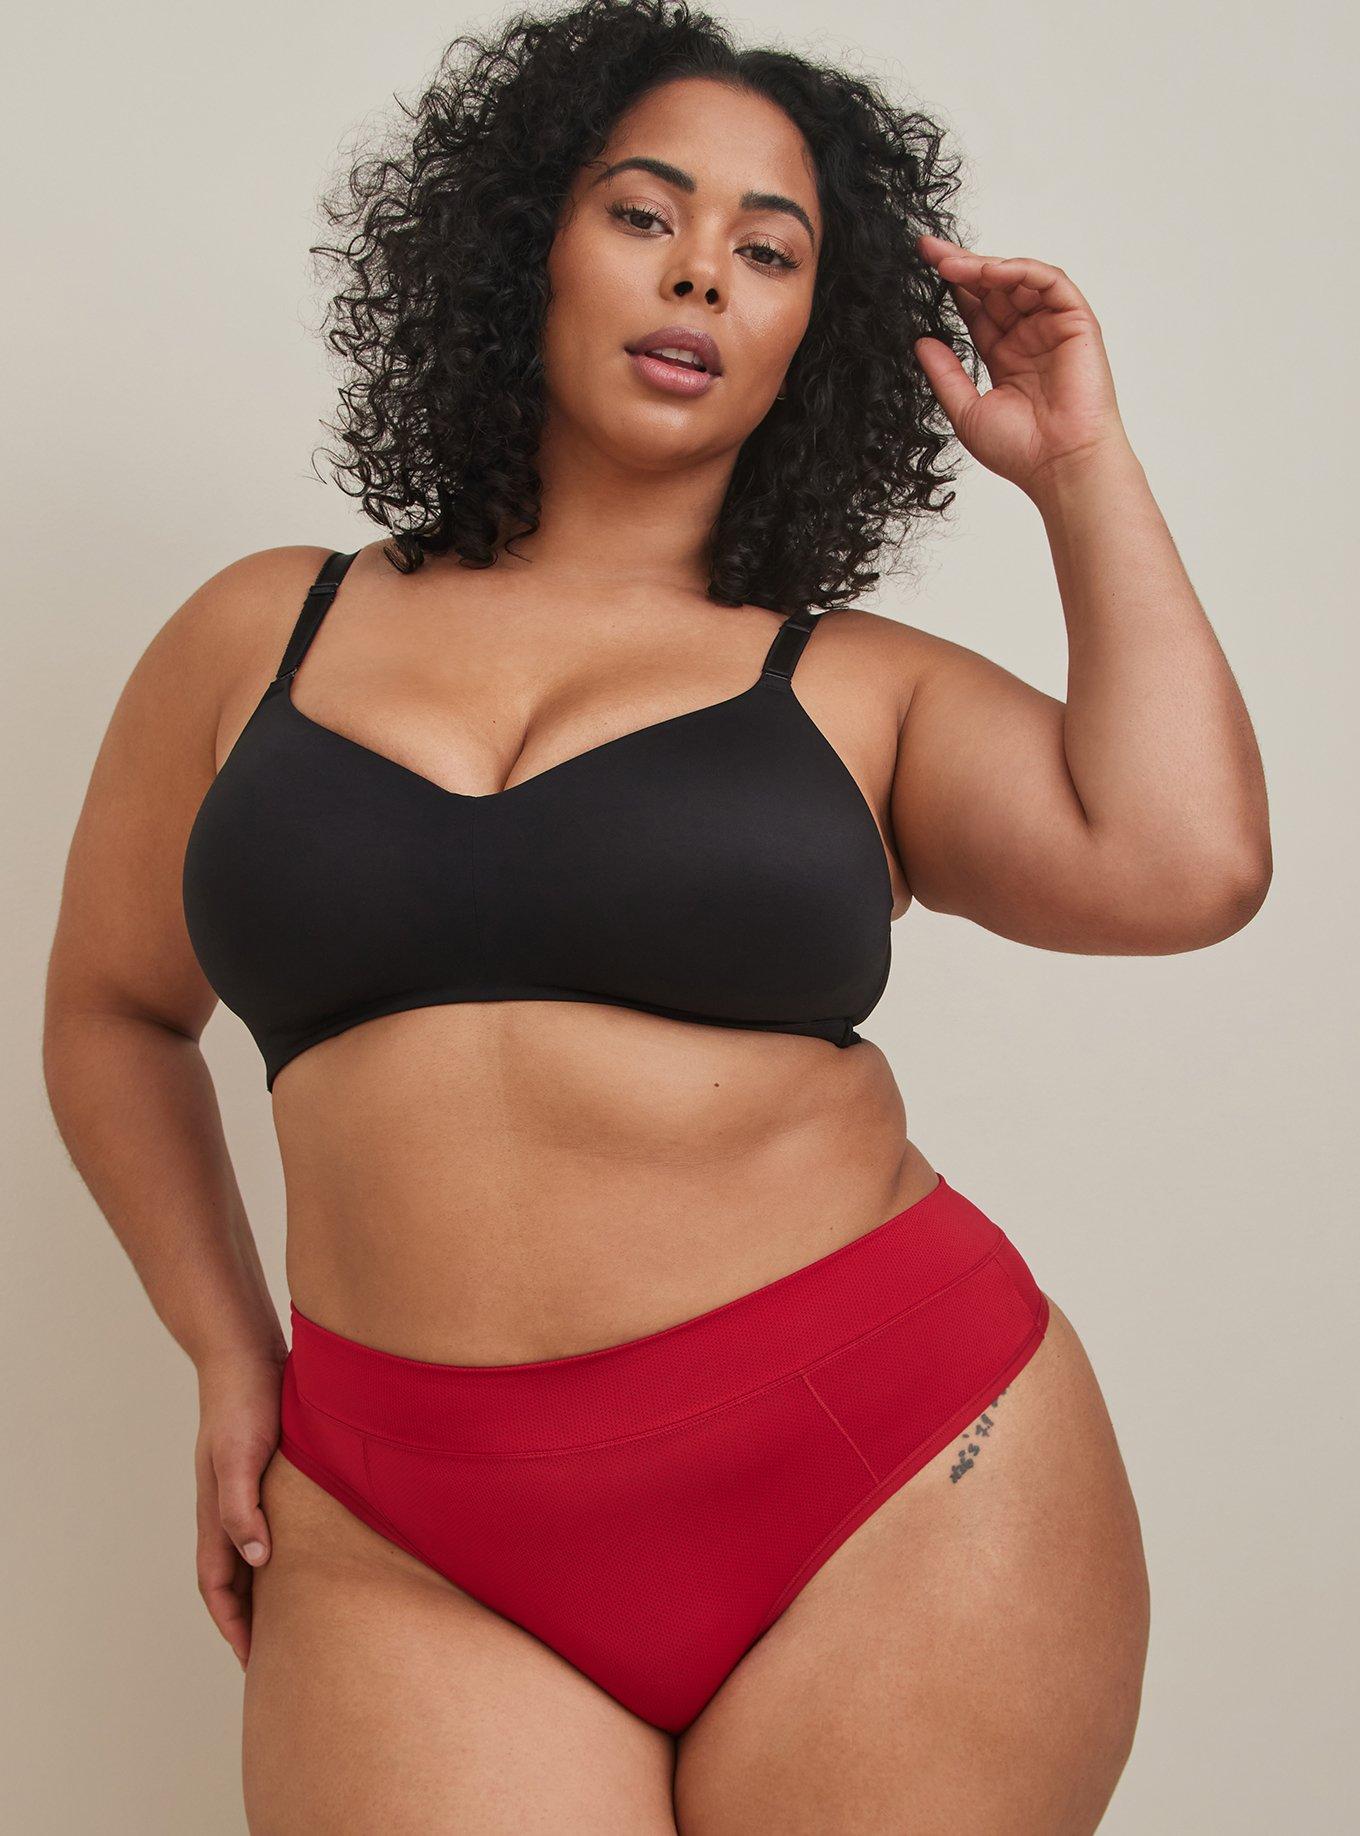 plus size caucasian middle age woman in trendy lingerie with no